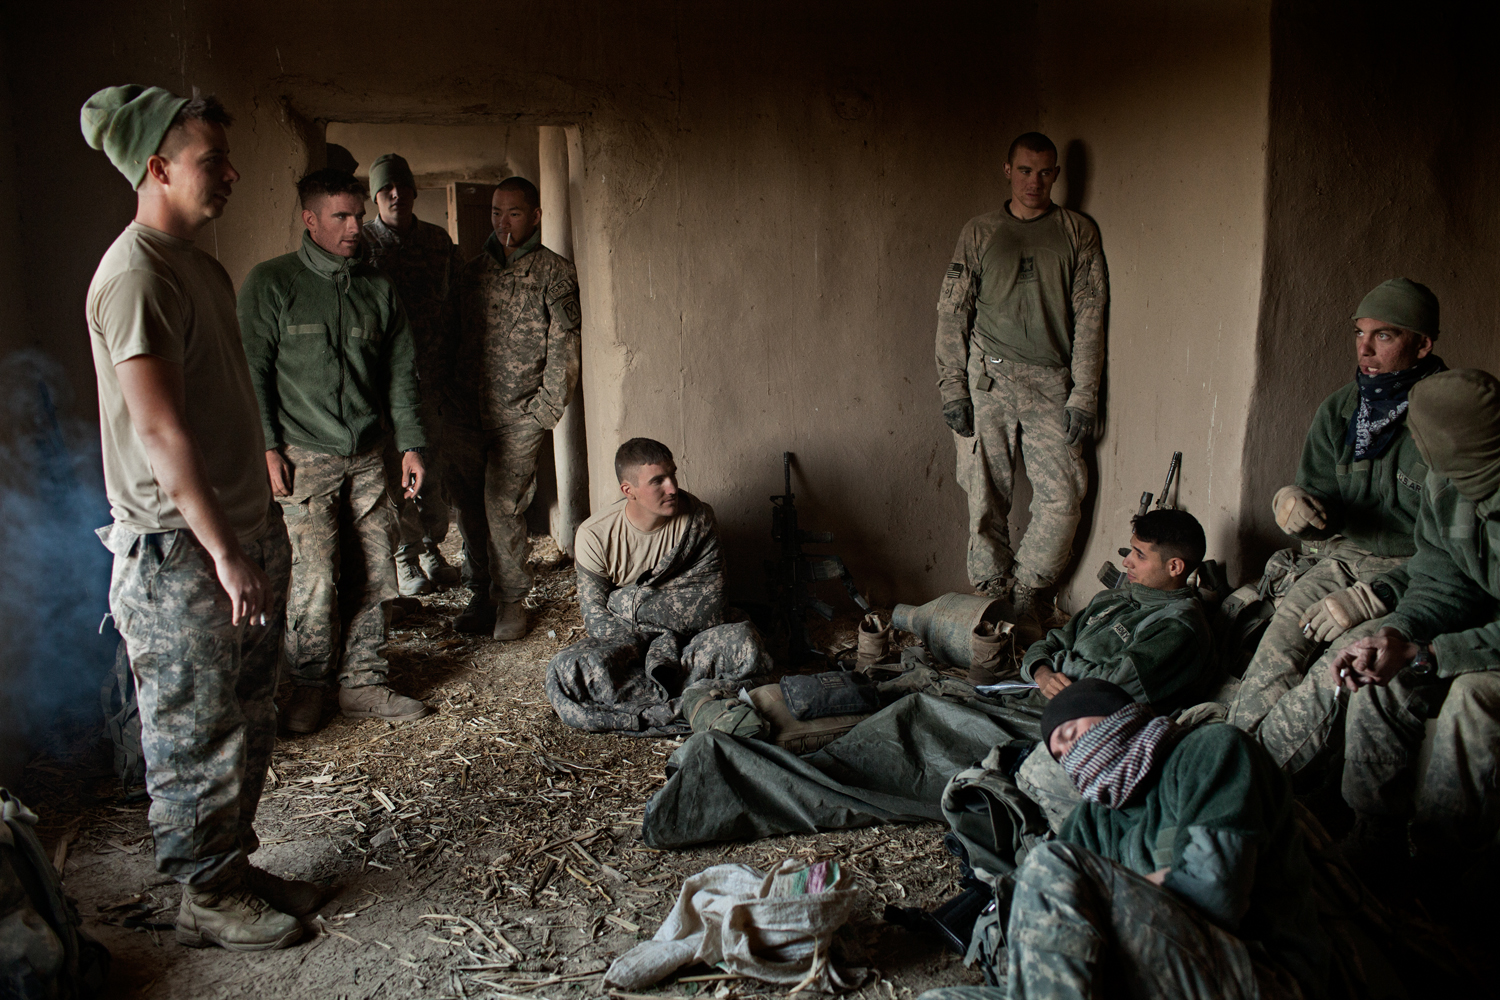  U.S. Army soldiers occupy an abandoned house during an operation in the Tangi Valley, Wardak Province, Afghanistan.       